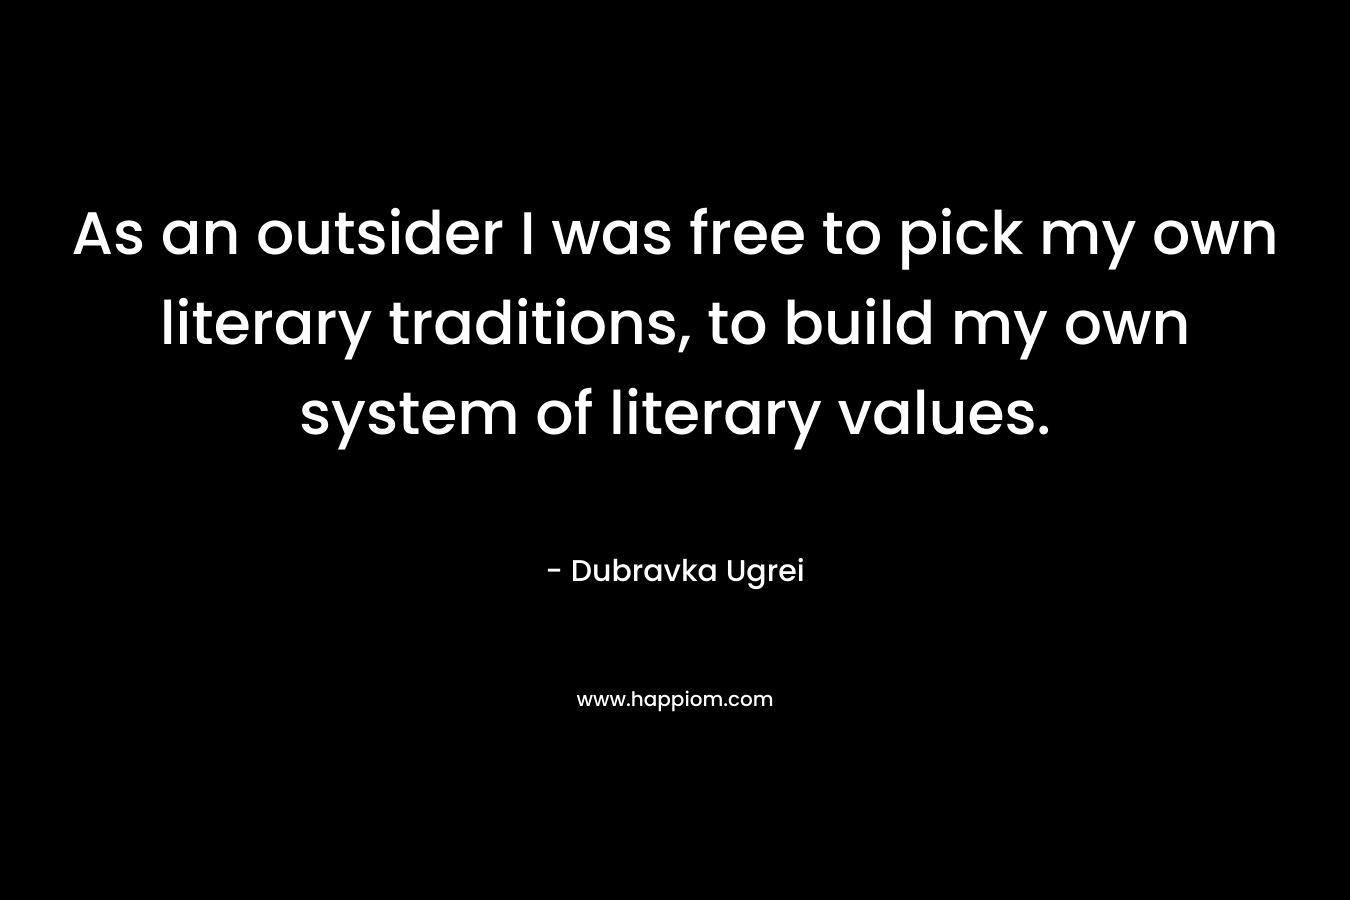 As an outsider I was free to pick my own literary traditions, to build my own system of literary values. – Dubravka Ugrei